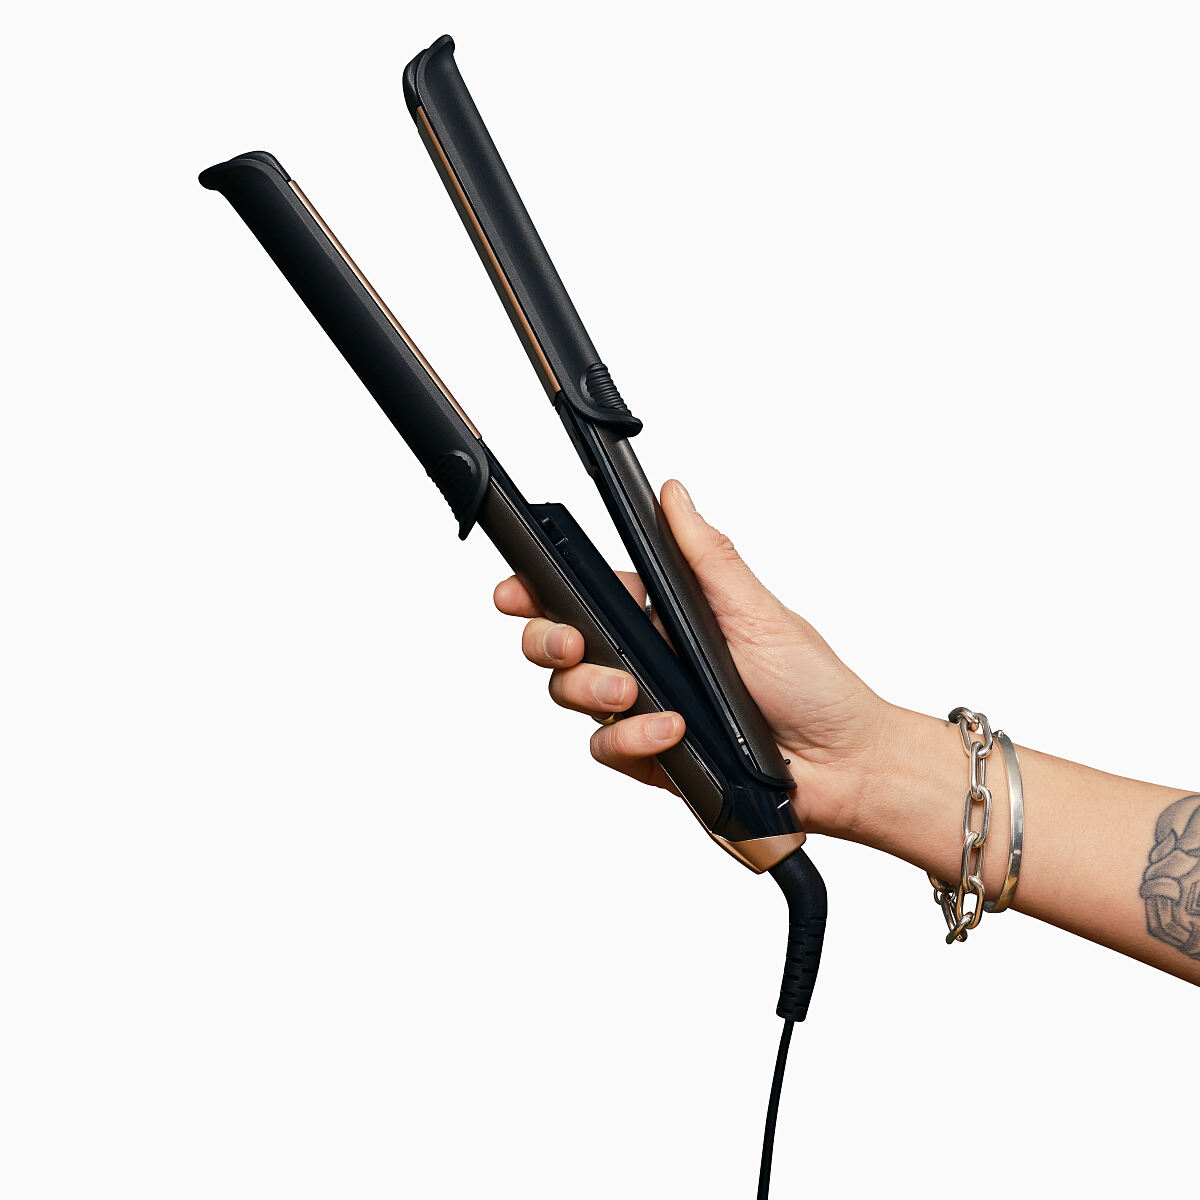 Remington ONE Straight & Curl Styler_89,99 EURO (1)